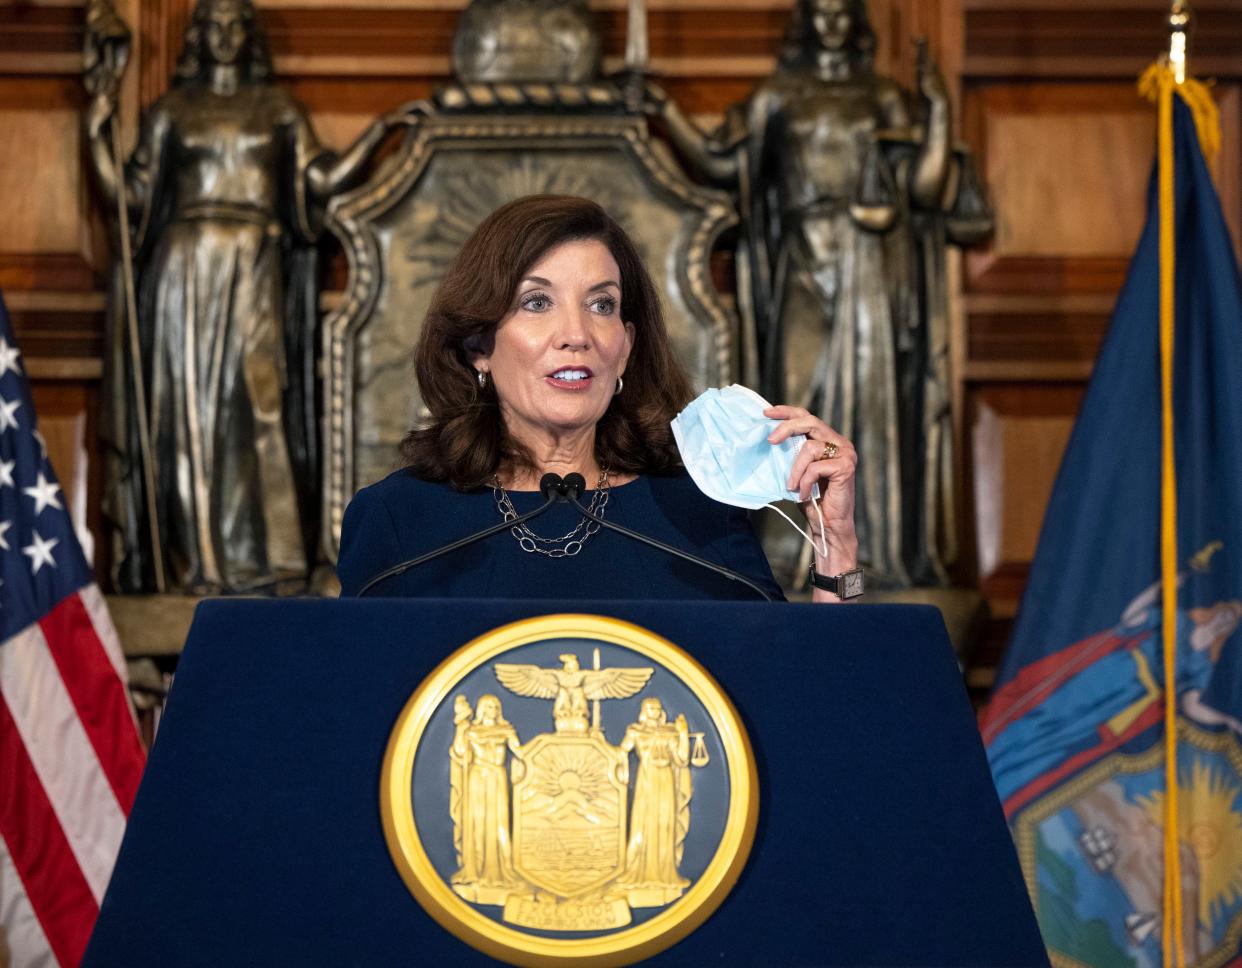 New York Gov. Kathy Hochul delivers a COVID-19 update in the Red Room at the State Capitol in Albany, New York on Wednesday, Sept. 15, 201.